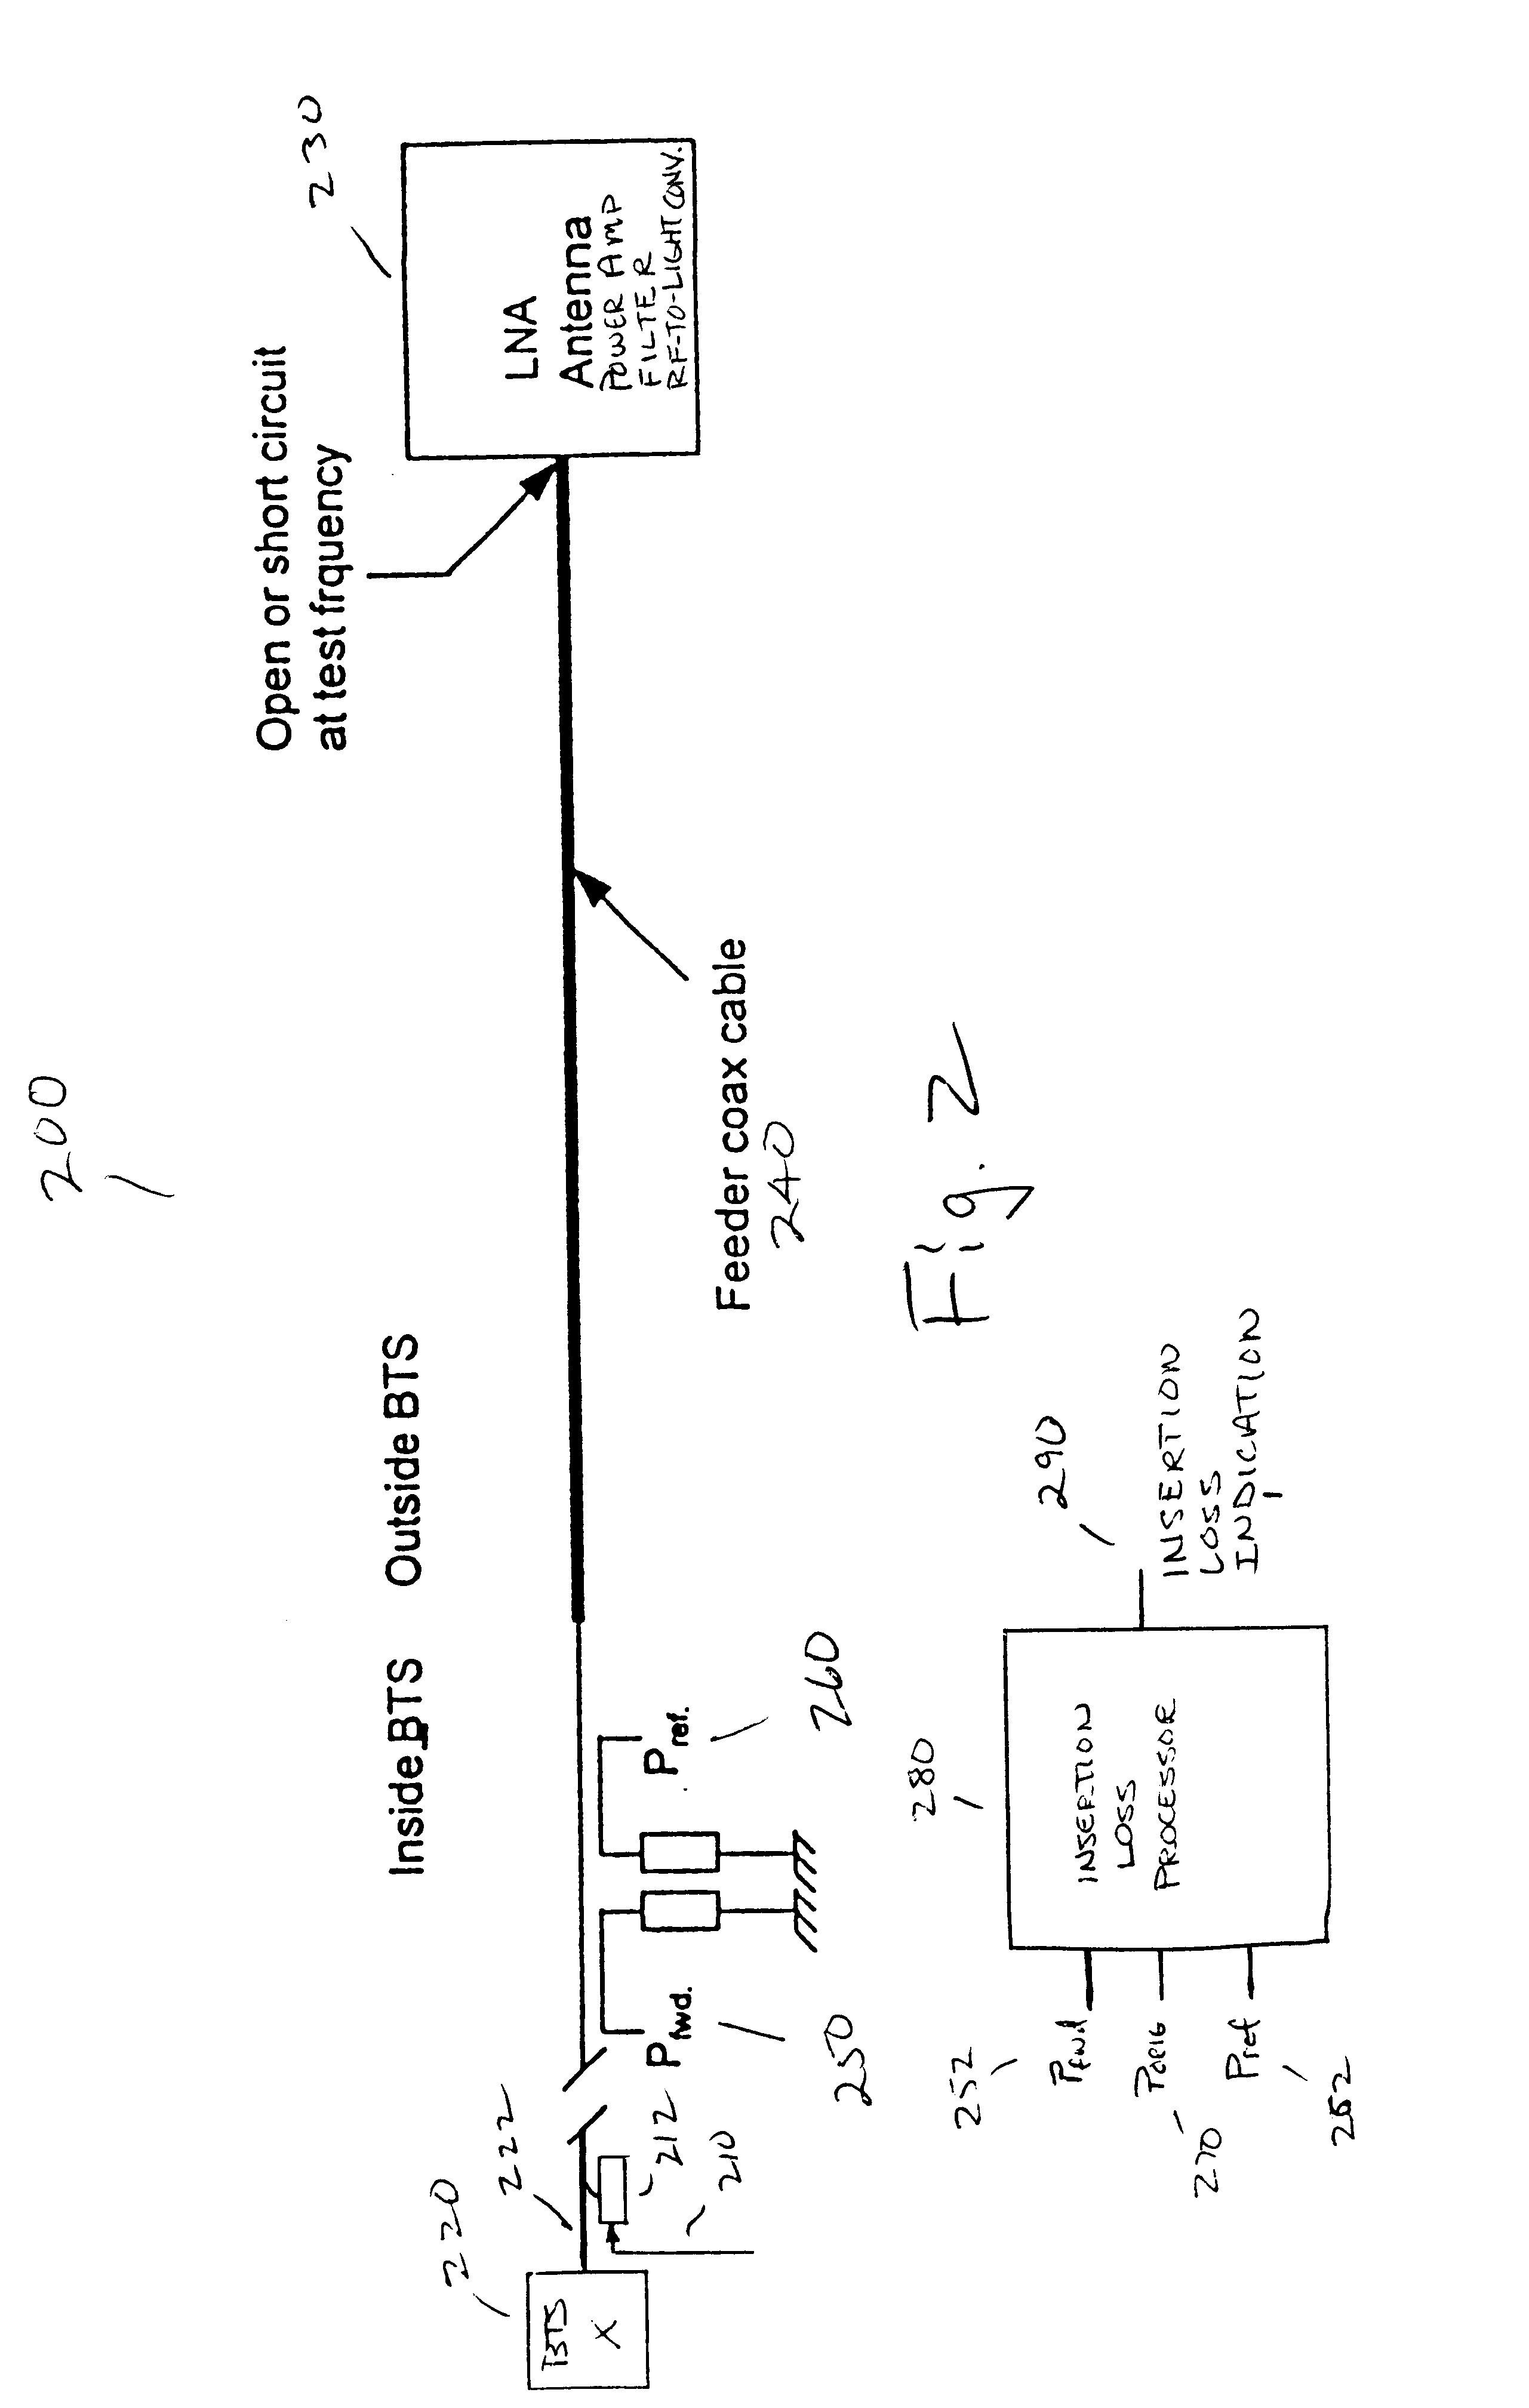 Method and apparatus for providing feeder cable insertion loss detection in a transmission system without interfering with normal operation